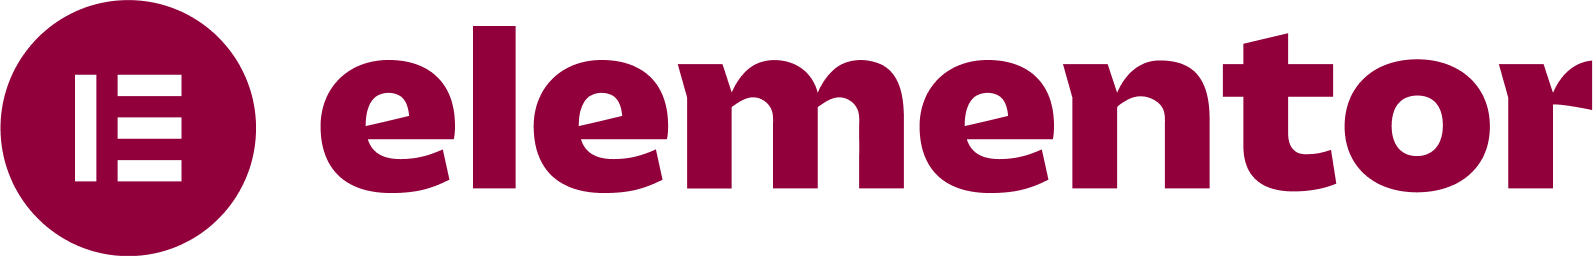 Logo of elementor, featuring a red oval and the word "elementor" in stylized dark letters.